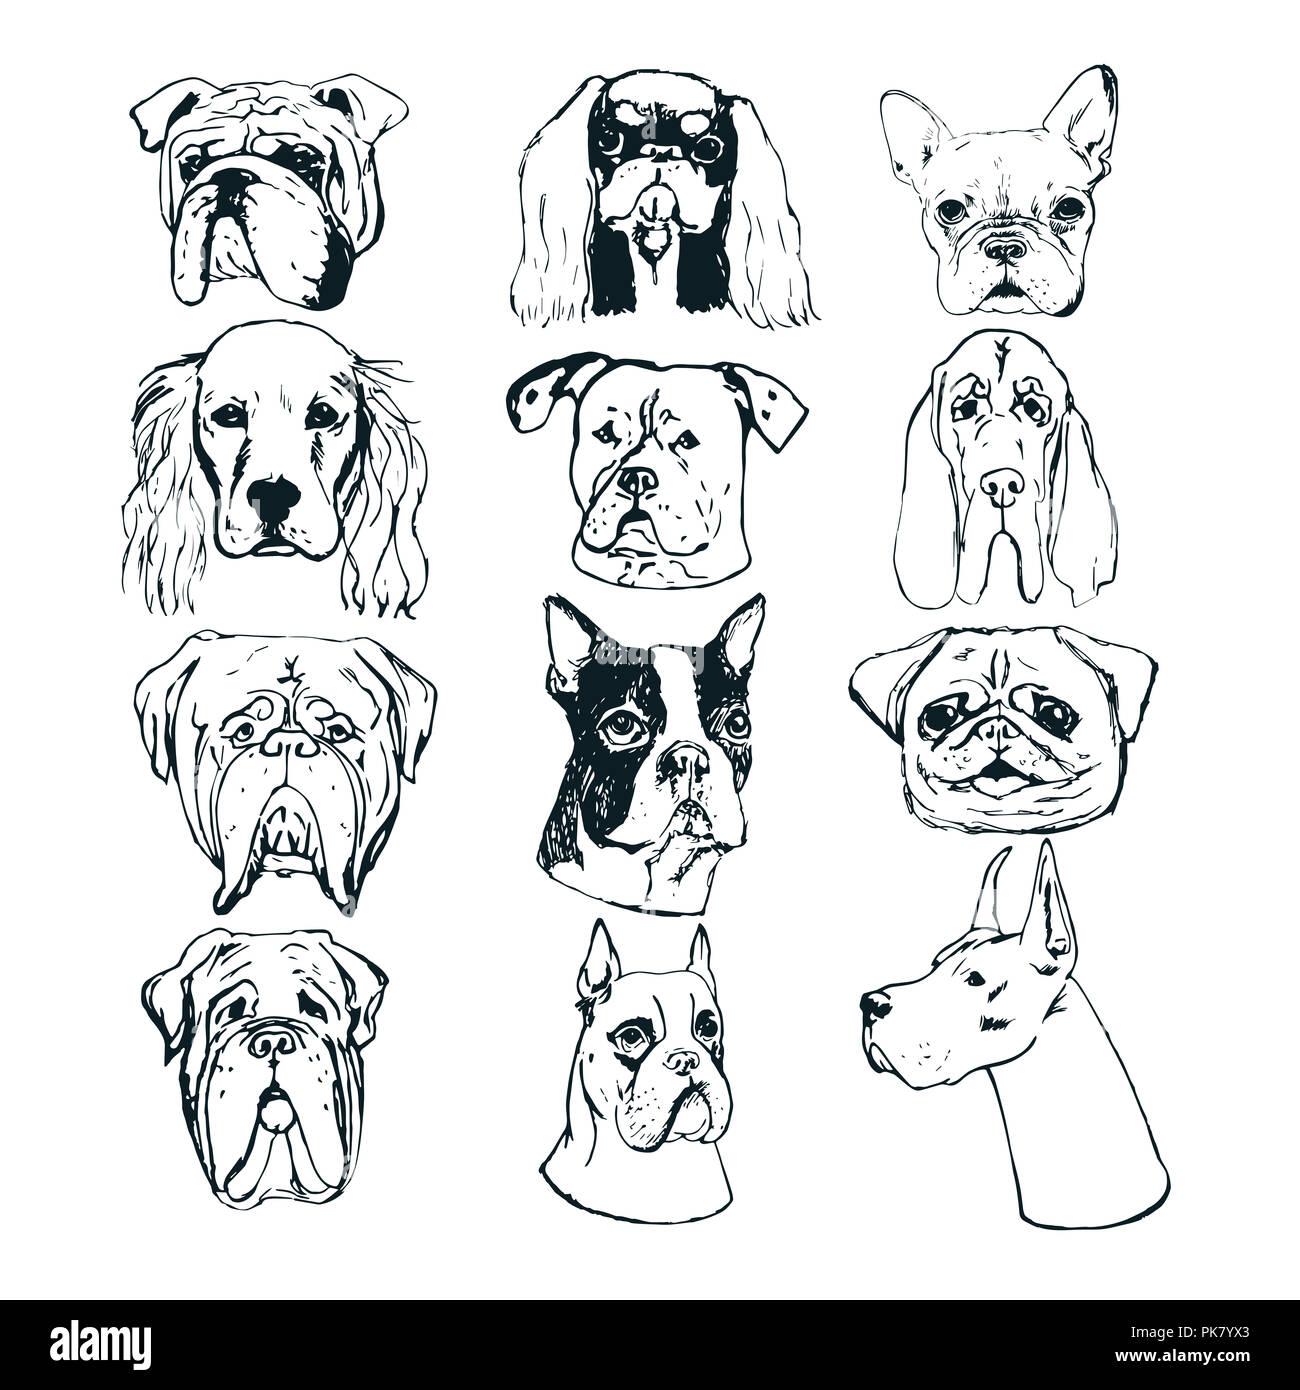 Vector dog set. Sketches of purebred dogs. Vector elements for dog club logos. T-shirt prints for dog lovers. Stock Photo